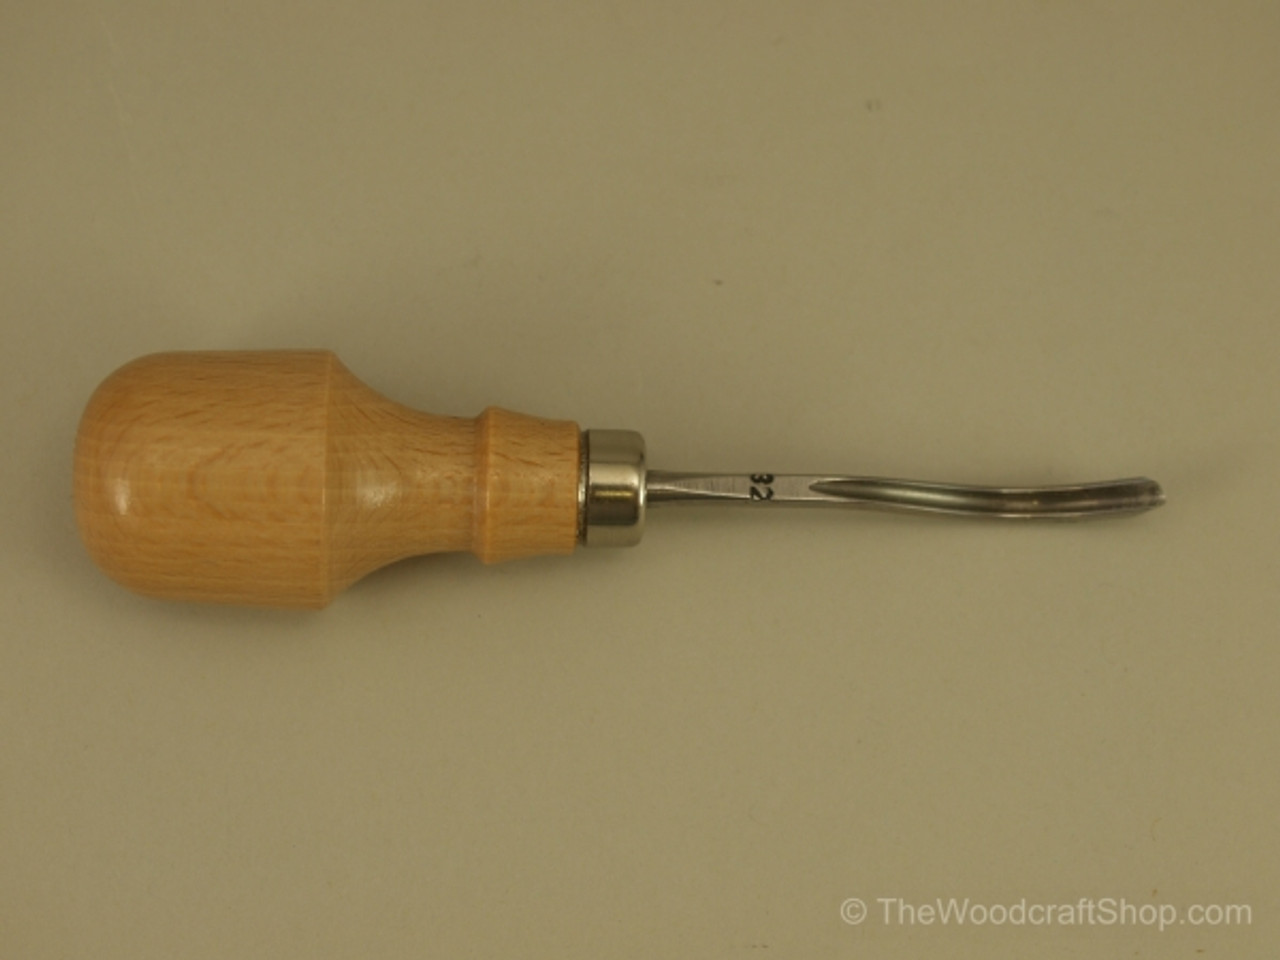 Shows an image of the Stubai Palm #11 Short Bent Spoon Veiner 3mm with handle and depth of the blade.